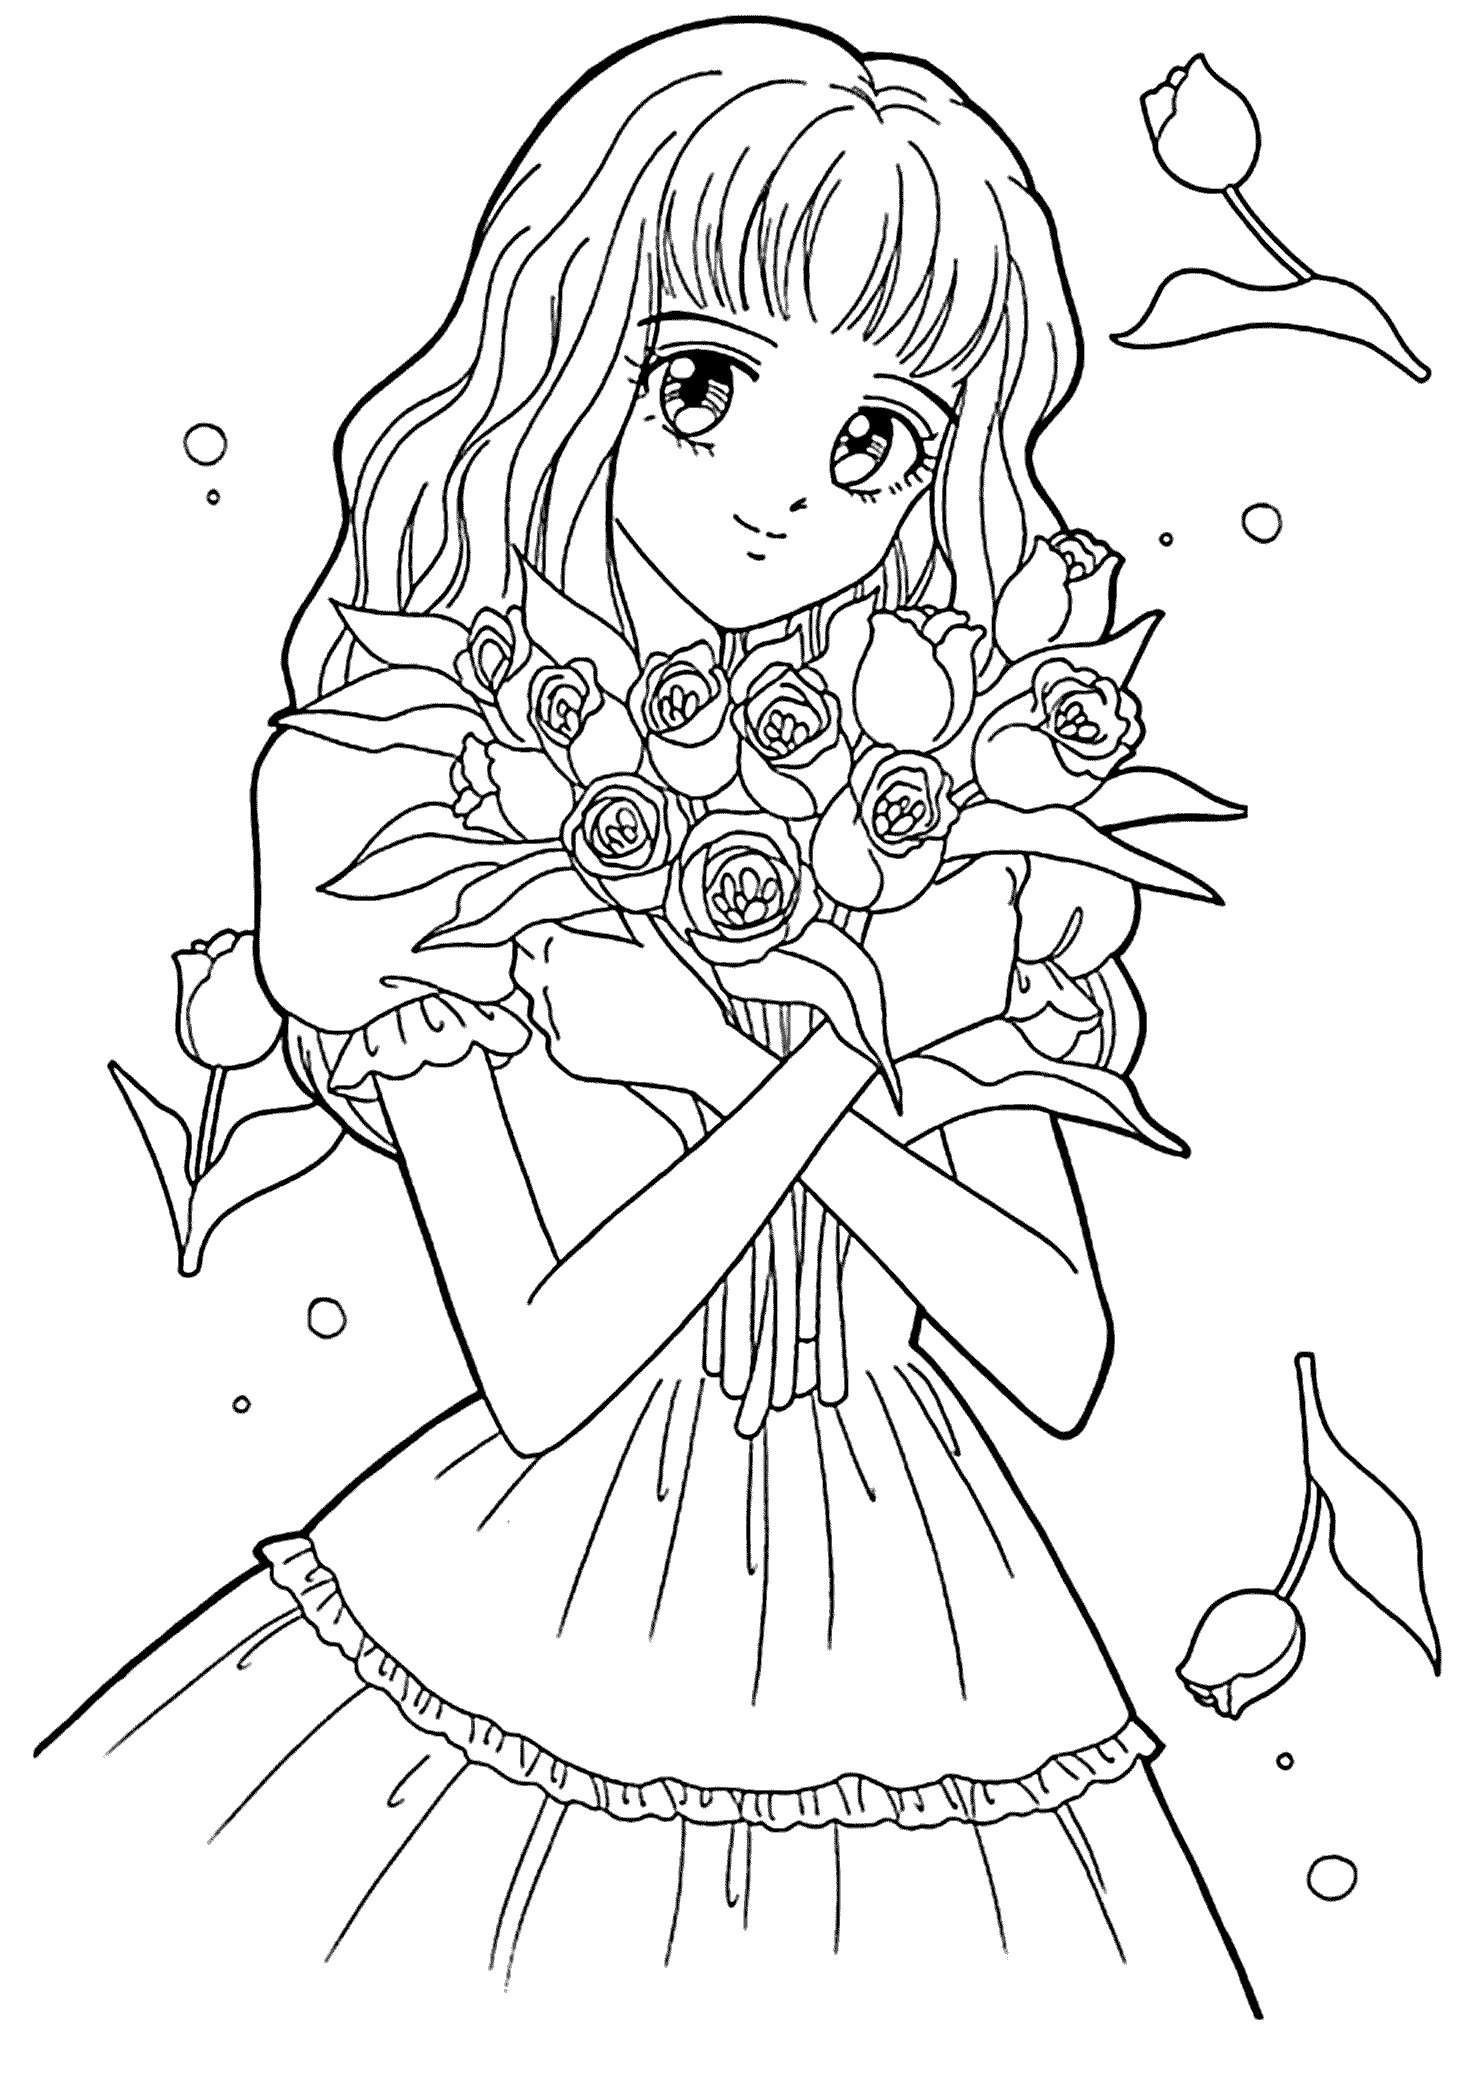 Girls Coloring Pages For Kids
 Best Free Printable Coloring Pages for Kids and Teens